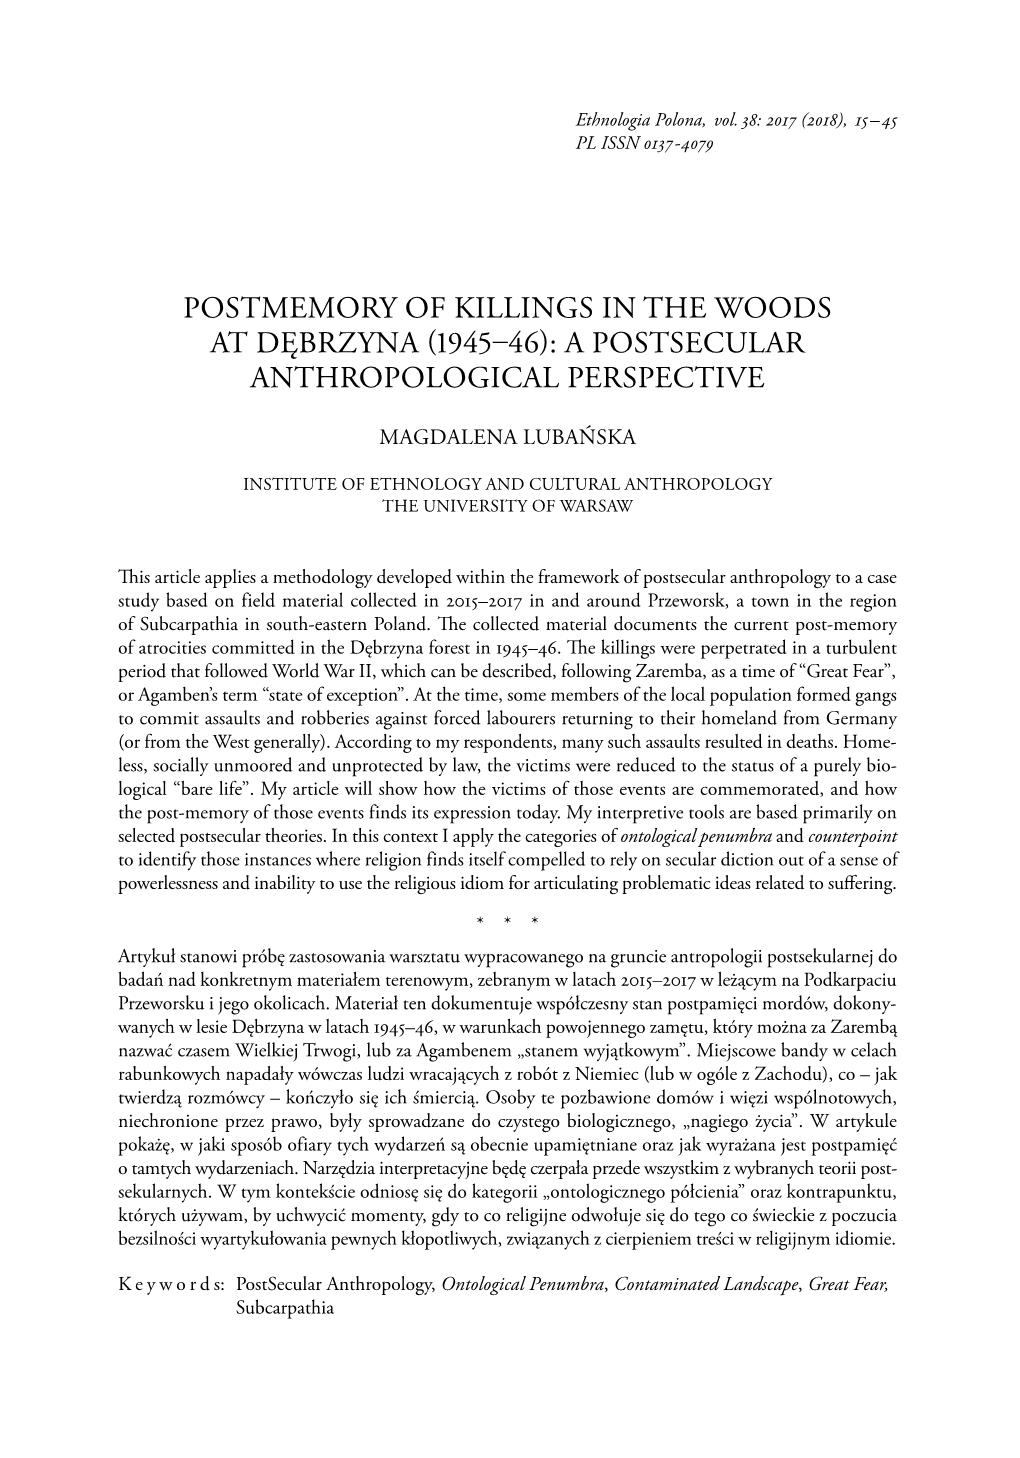 Postmemory of Killings in the Woods at Dębrzyna (1945–46): a Postsecular Anthropological Perspective